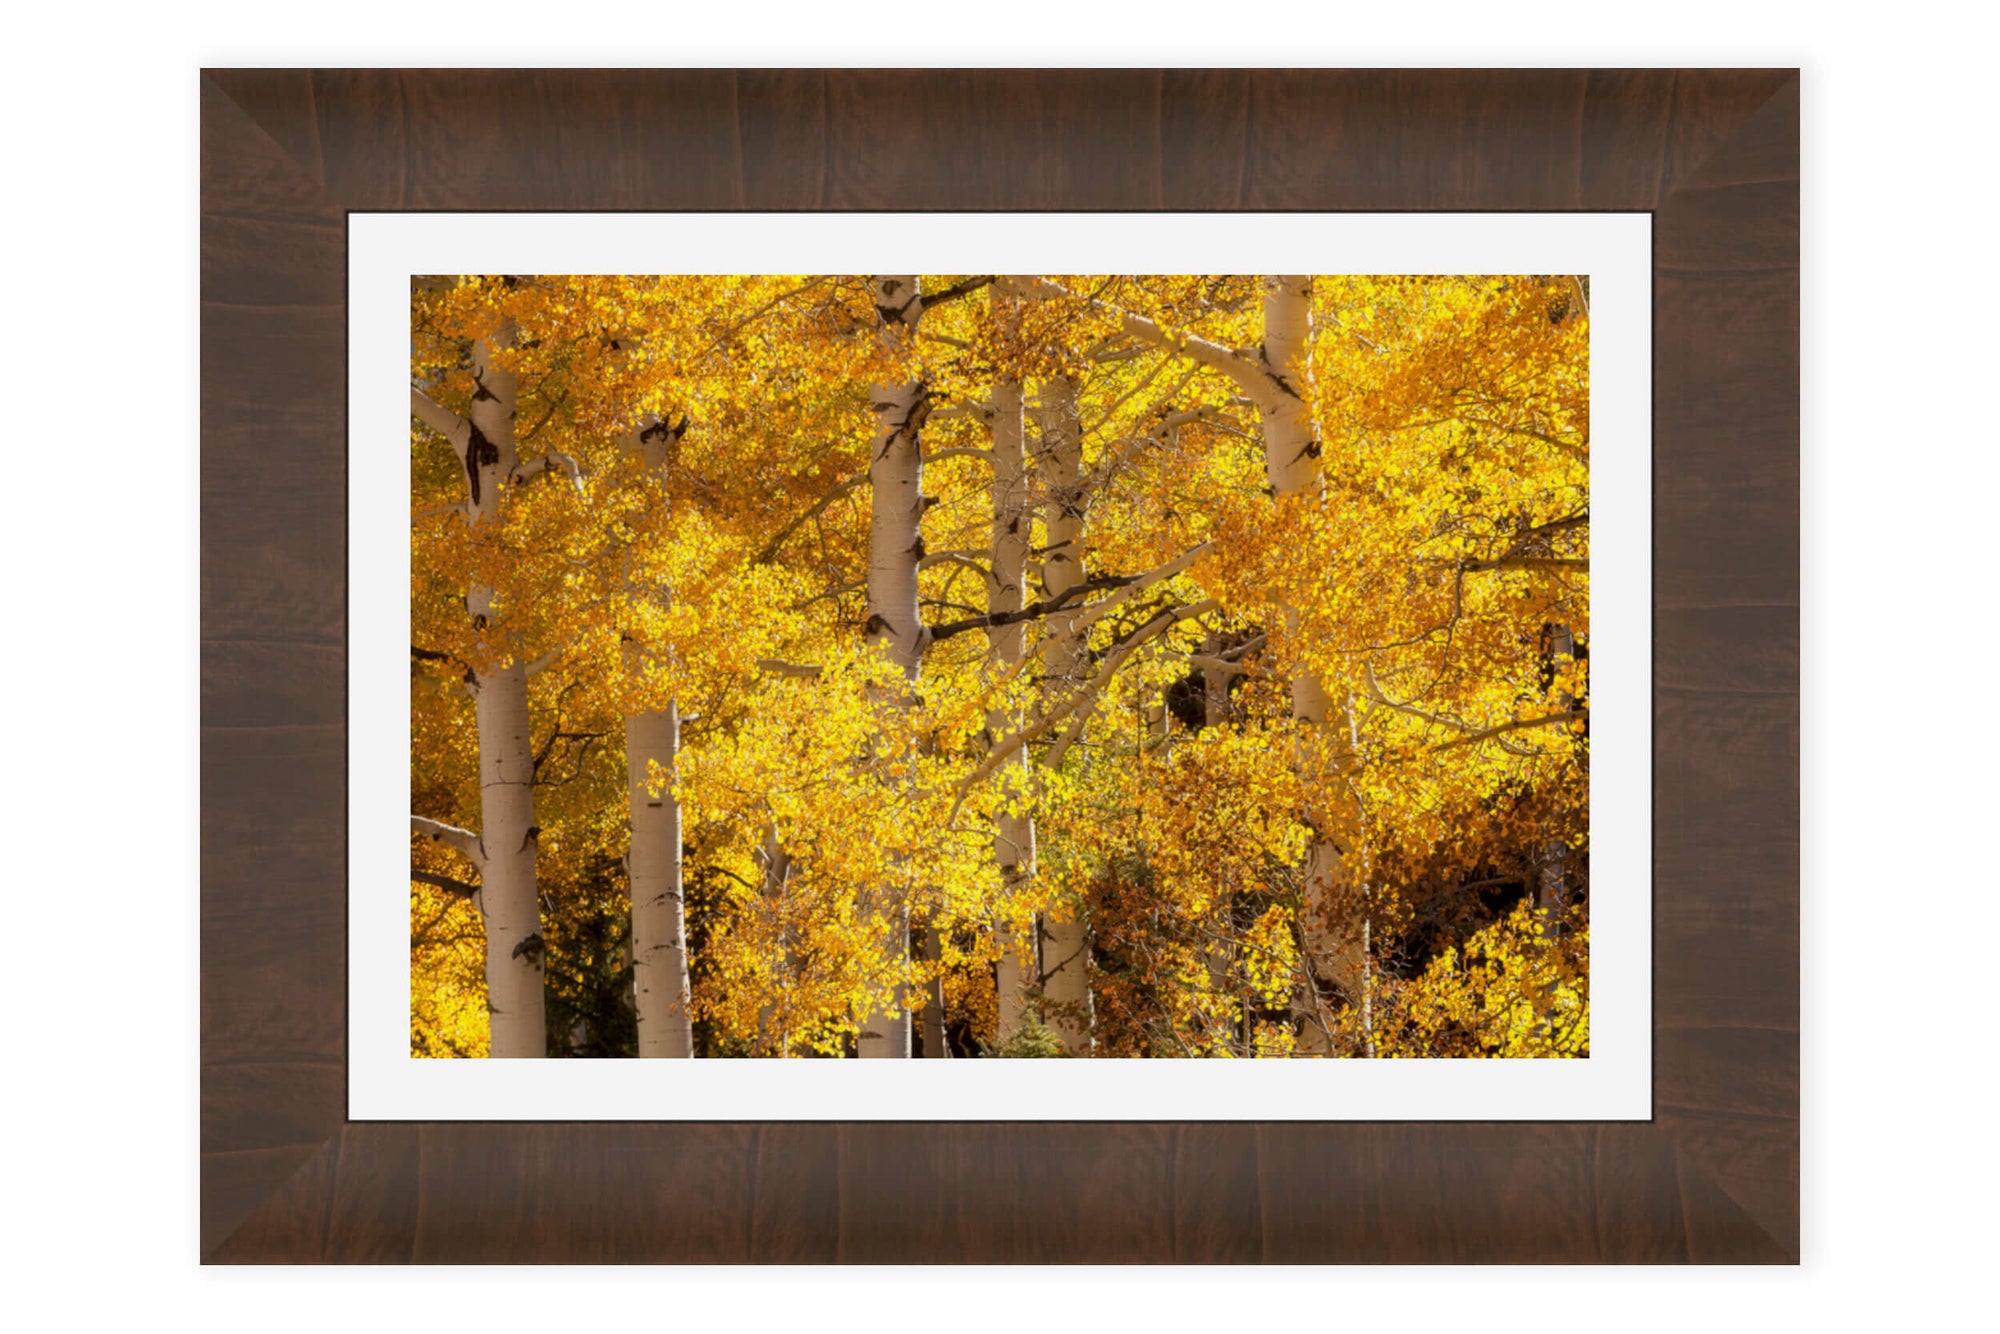 A framed Colorado fall colors picture from a hike near Telluride.